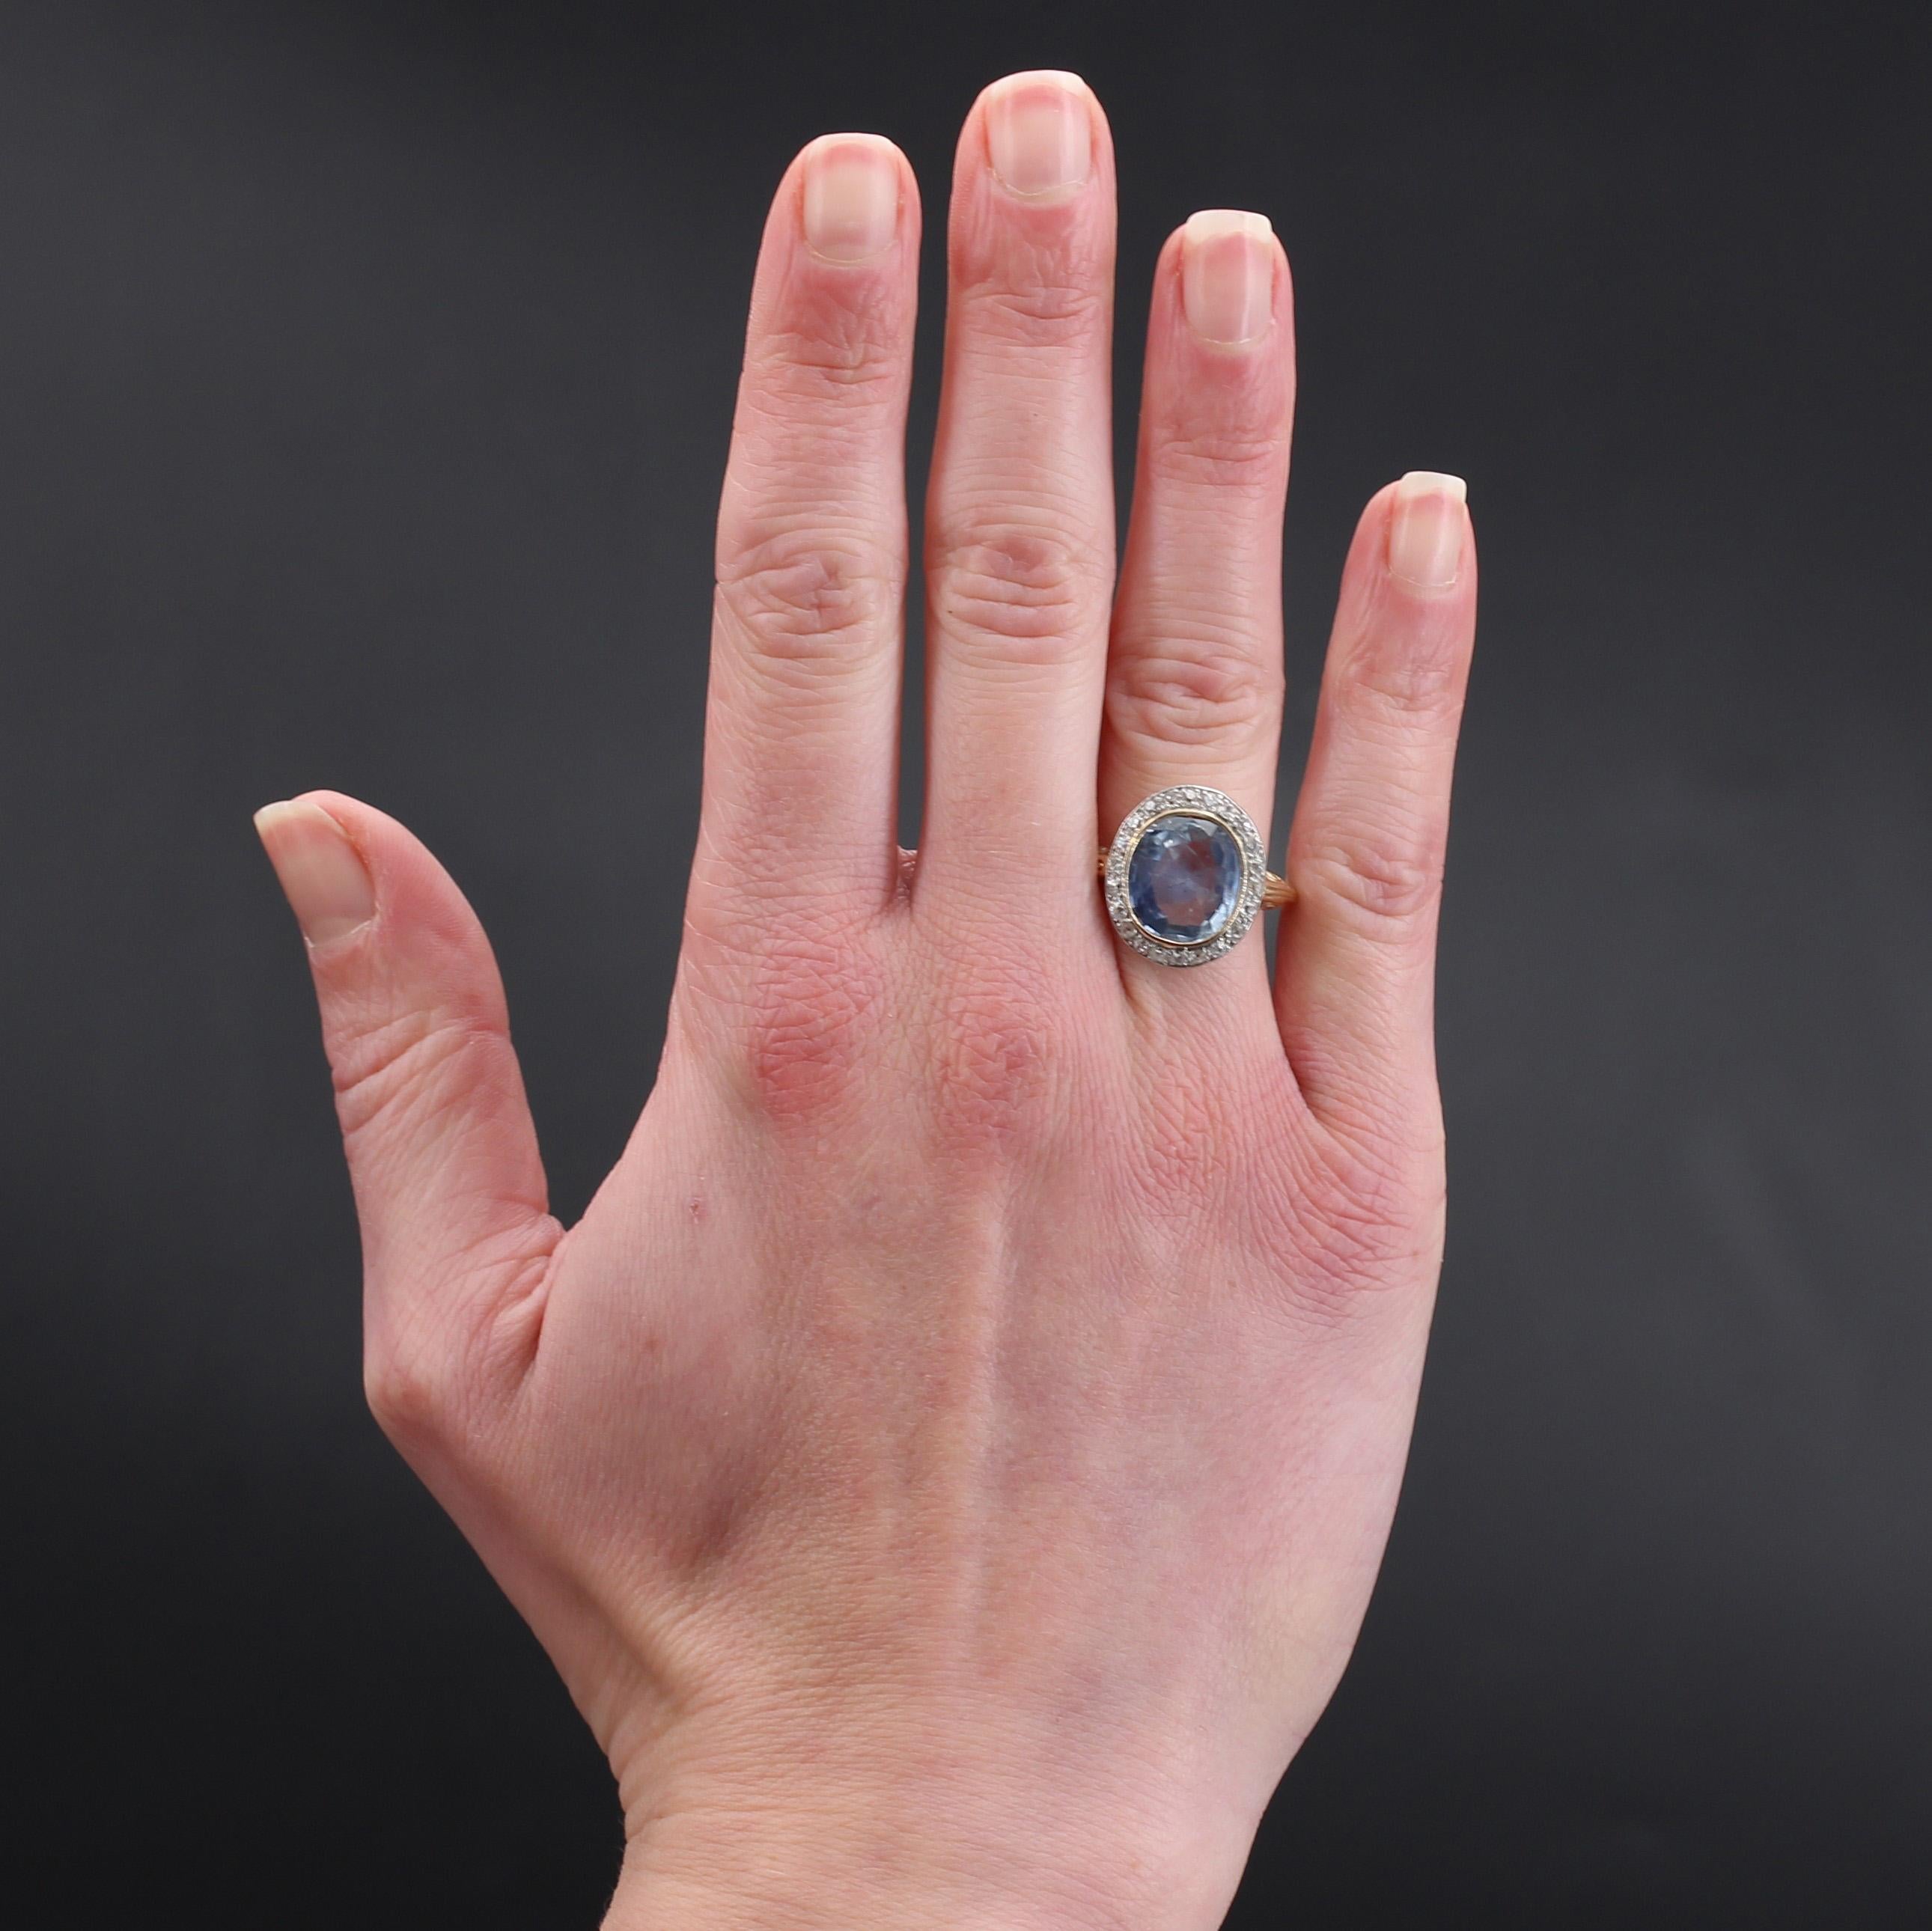 Ring in 18 karat yellow gold and platinum, own and grotesque hallmarks.
Antique ring from the beginning of the XXth century, its flat mounting is decorated in closed setting with a splendid cushion-cut sapphire in a surrounding of antique